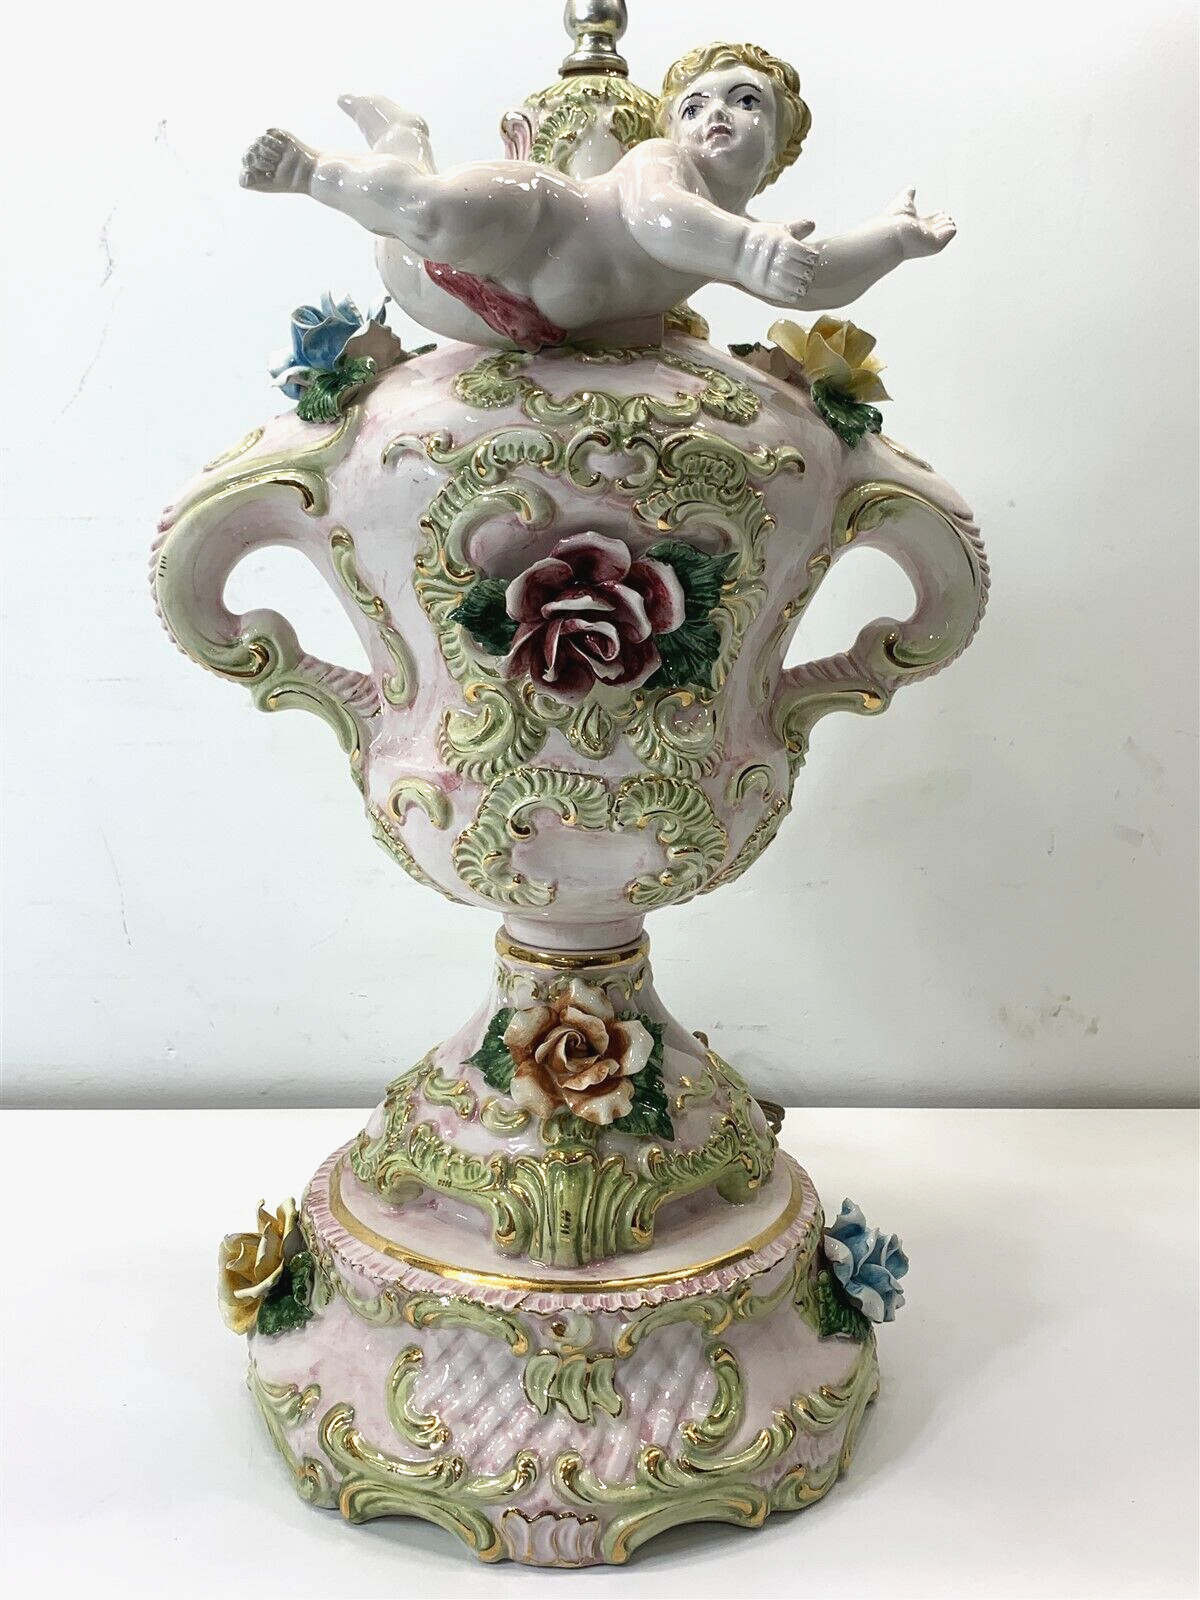 VERY NICE RARE VINTAGE LARGE CAPODIMONTE TABLE LAMP ROSES AND CHERUB #1